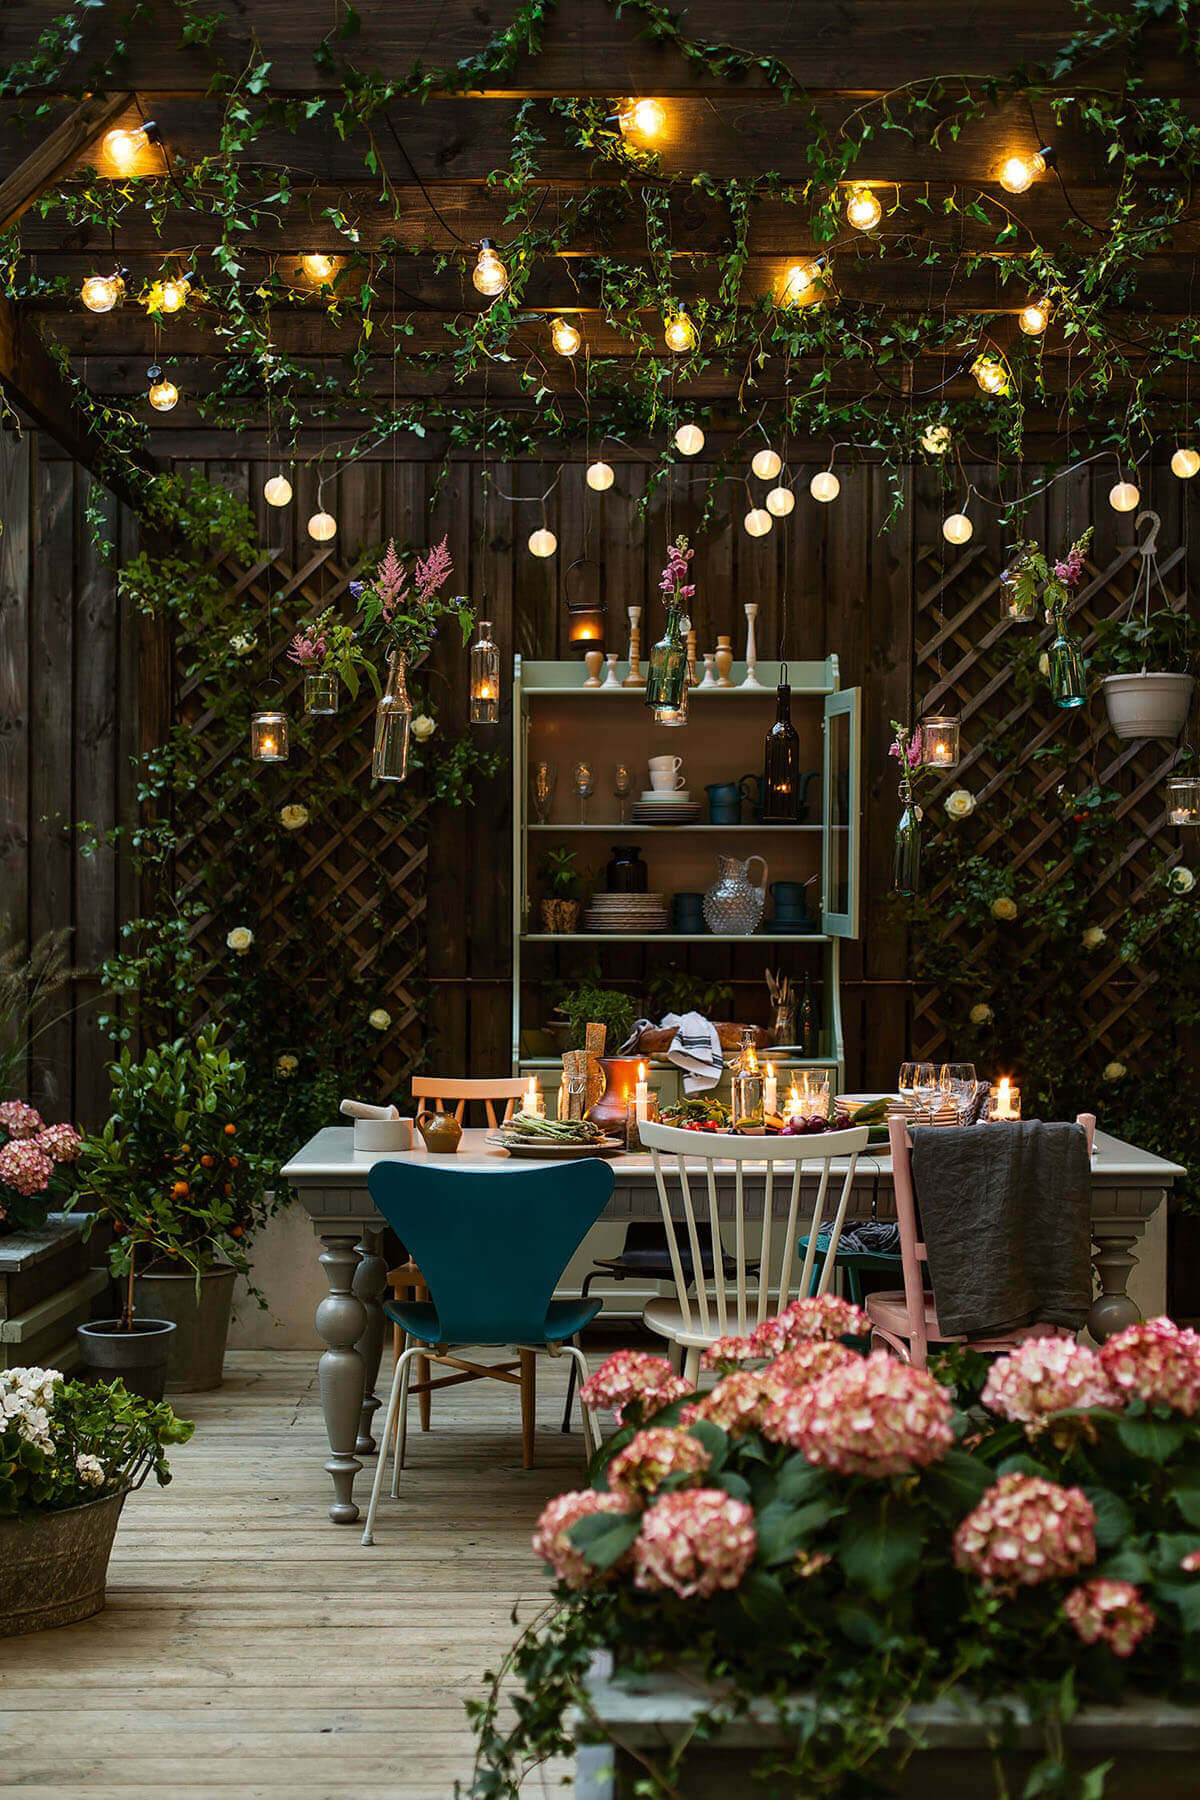 Whimsical Garden Grotto with String Lights